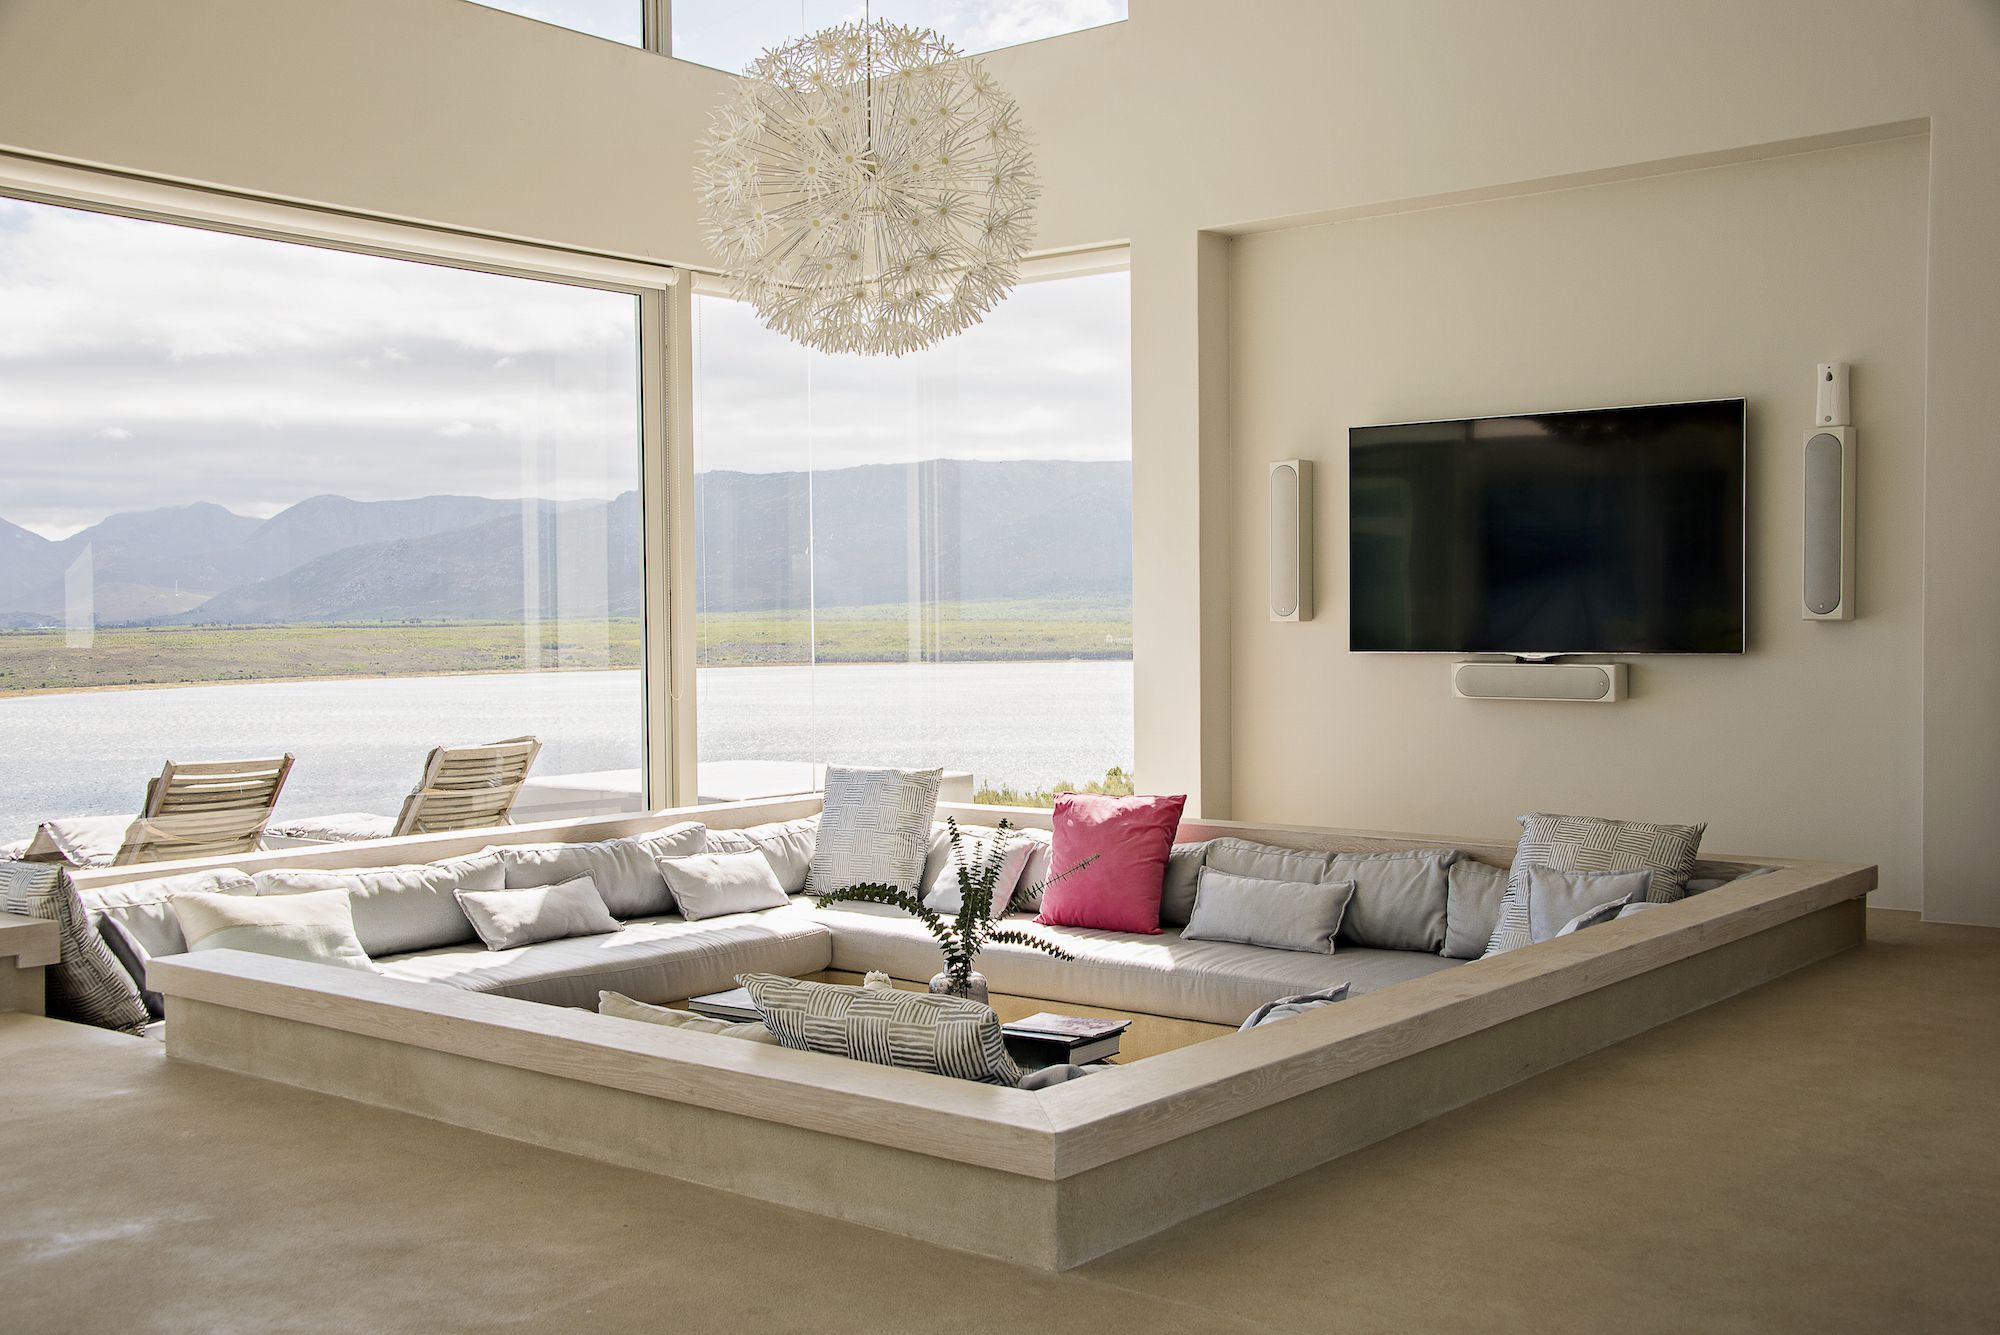 Living Room Vs Family Room - Difference Between Living Room And